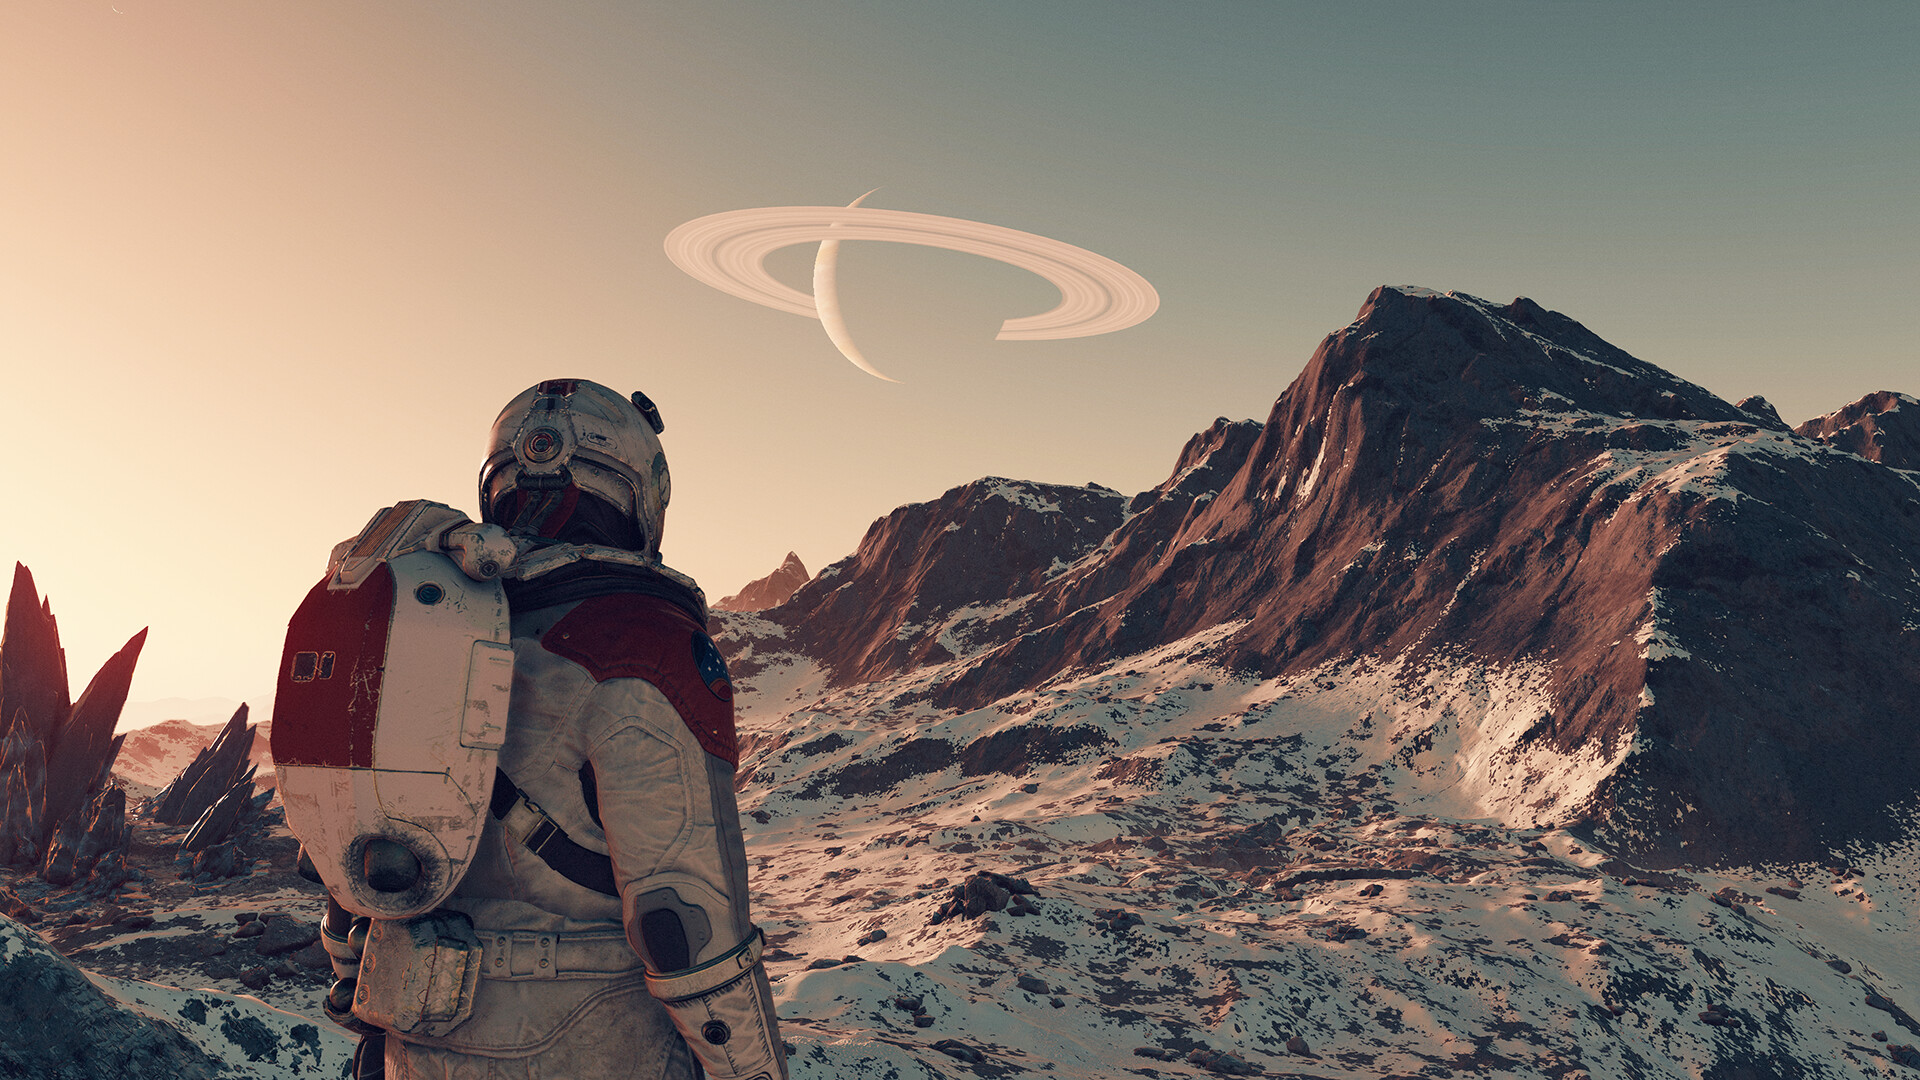 A screenshot from the video game Starfield: a figure in a space suit stands on a planet with snowy ground and mountains. In the sky there's the outline of a planet with a ring around it.